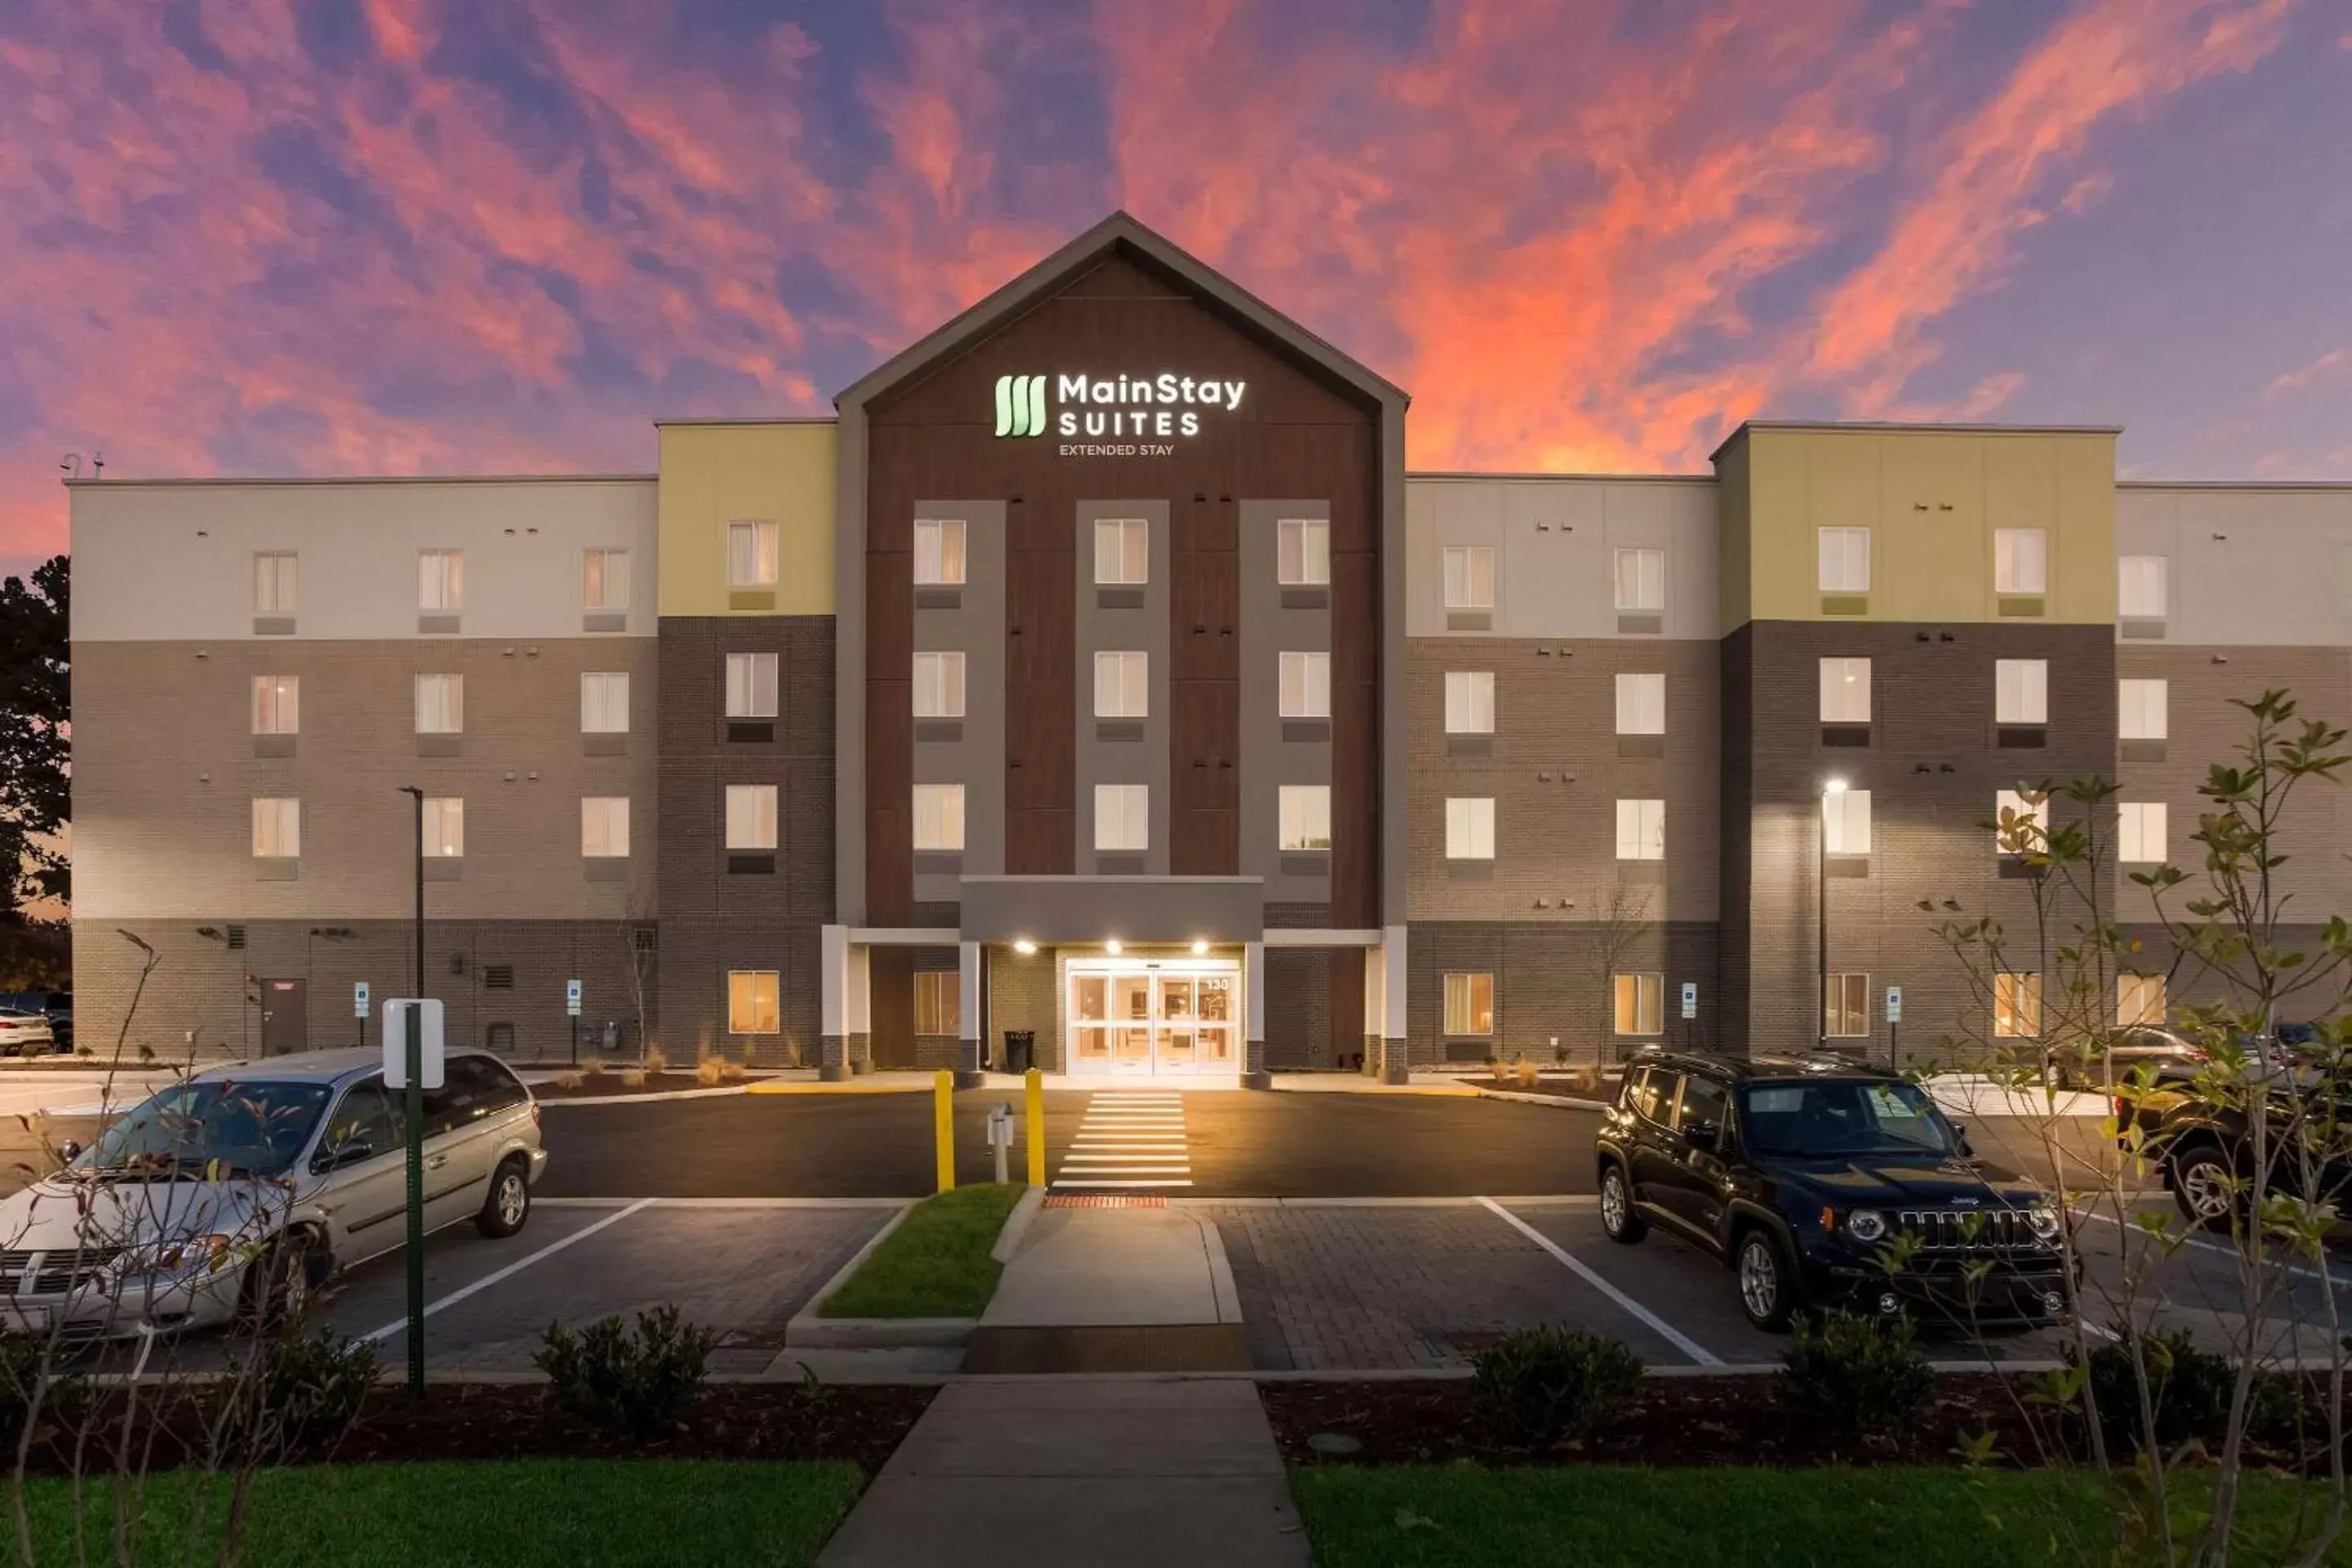 Other, Property Building in MainStay Suites Murfreesboro